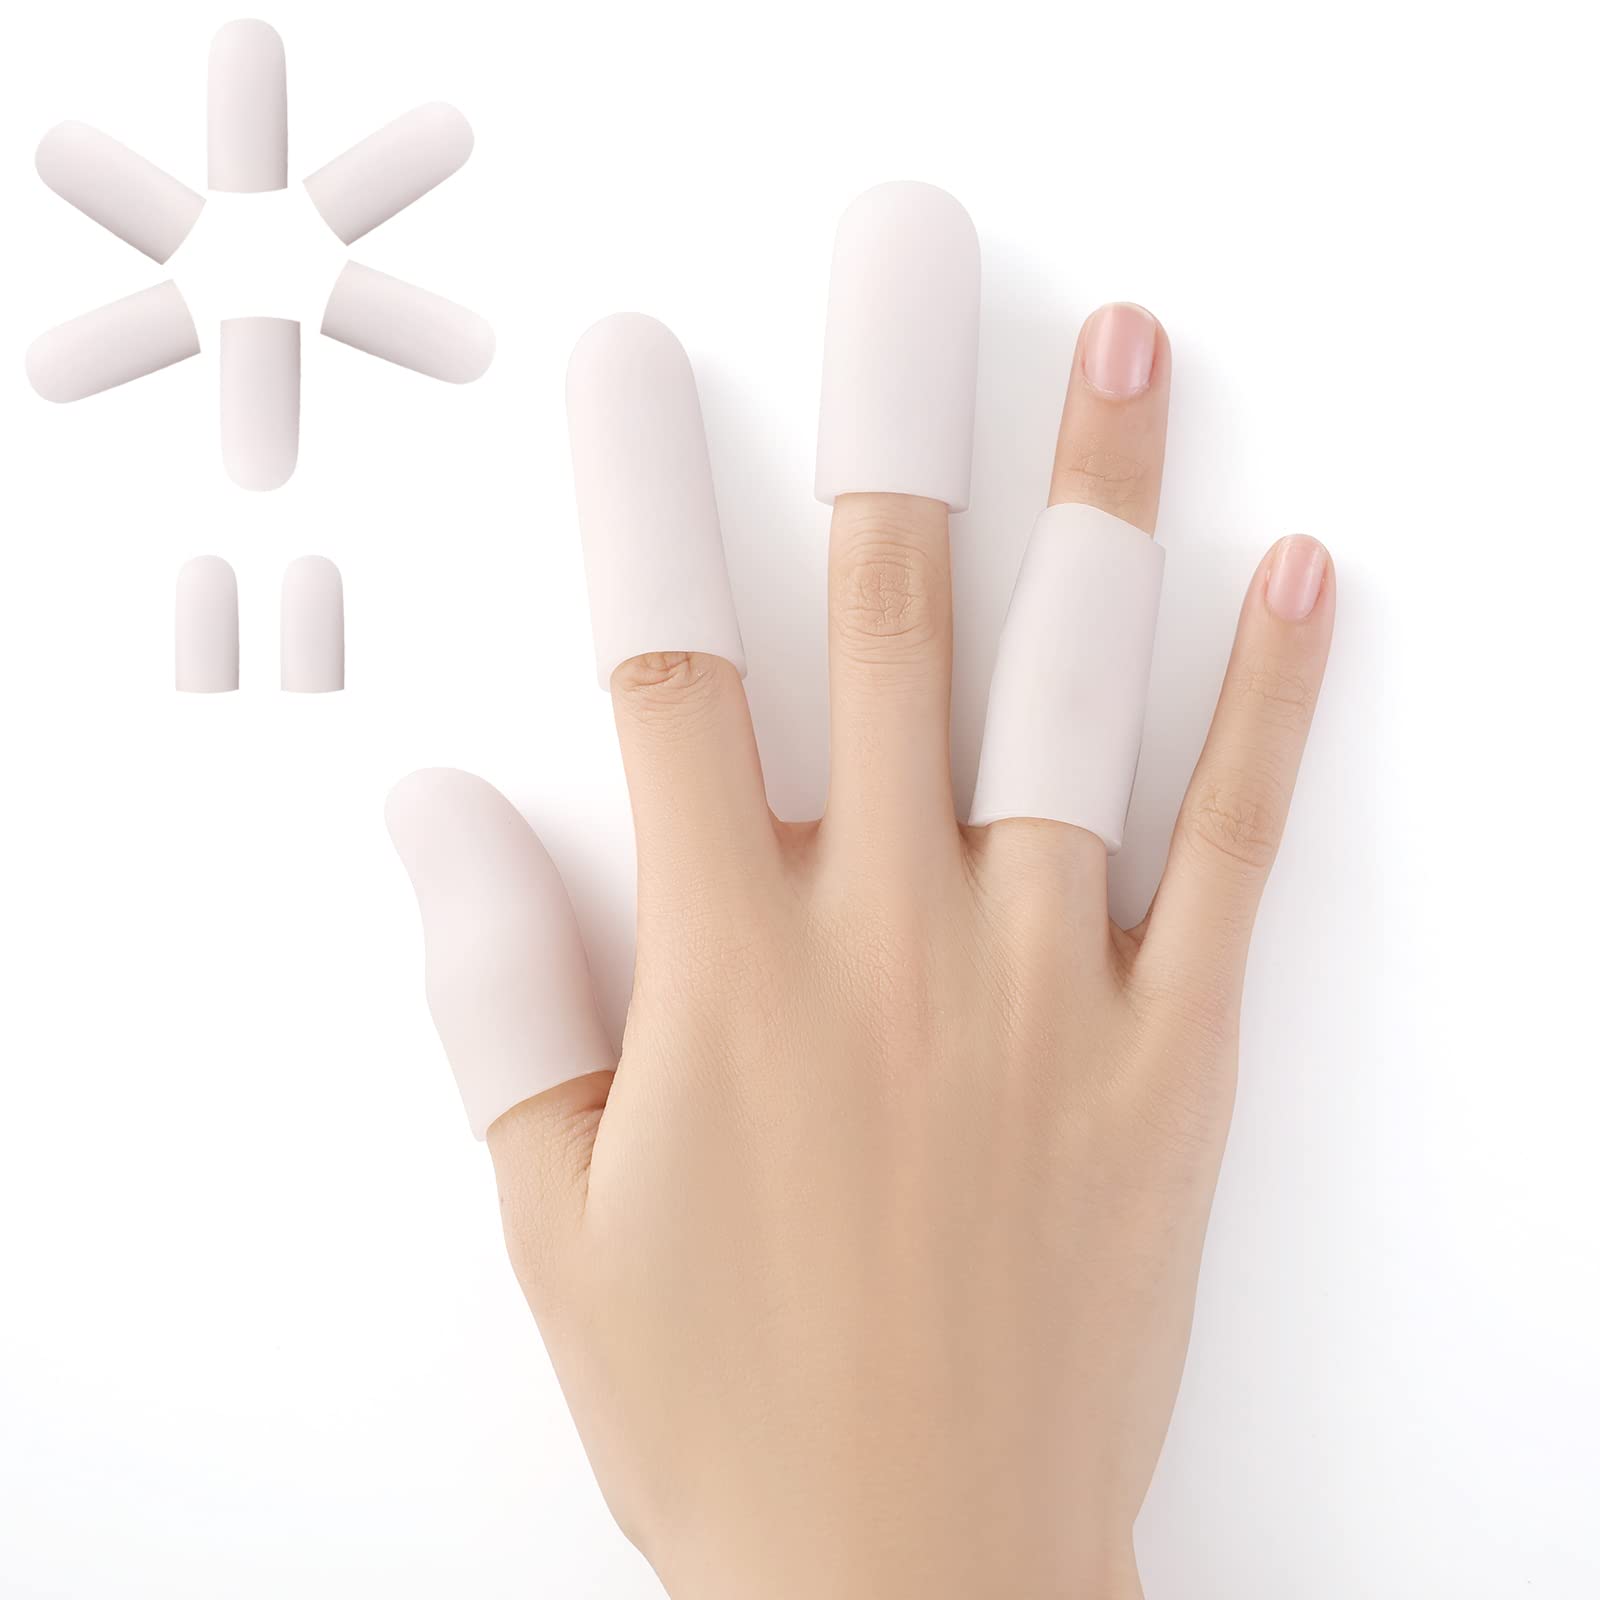 Niupiour Silicone Finger Protectors 14 Pieces of Rubber Finger